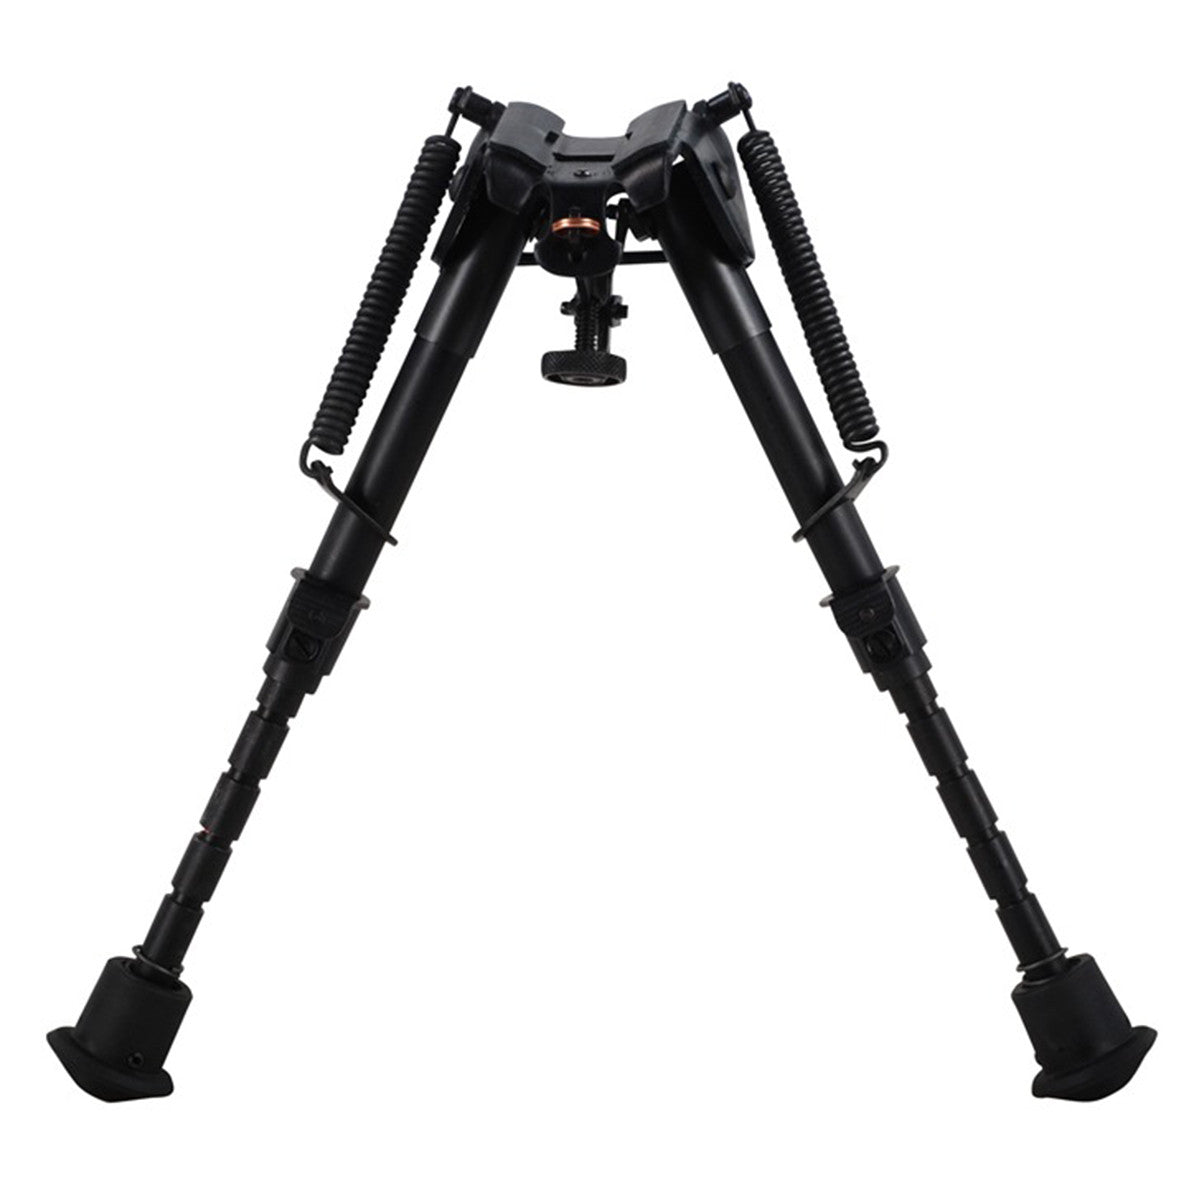 Harris 1A2-BRM 6 to 9 Inch Bipod in Harris 1A2-BRM 6 to 9 Inch Bipod - goHUNT Shop by GOHUNT | Harris Engineering Inc. - GOHUNT Shop